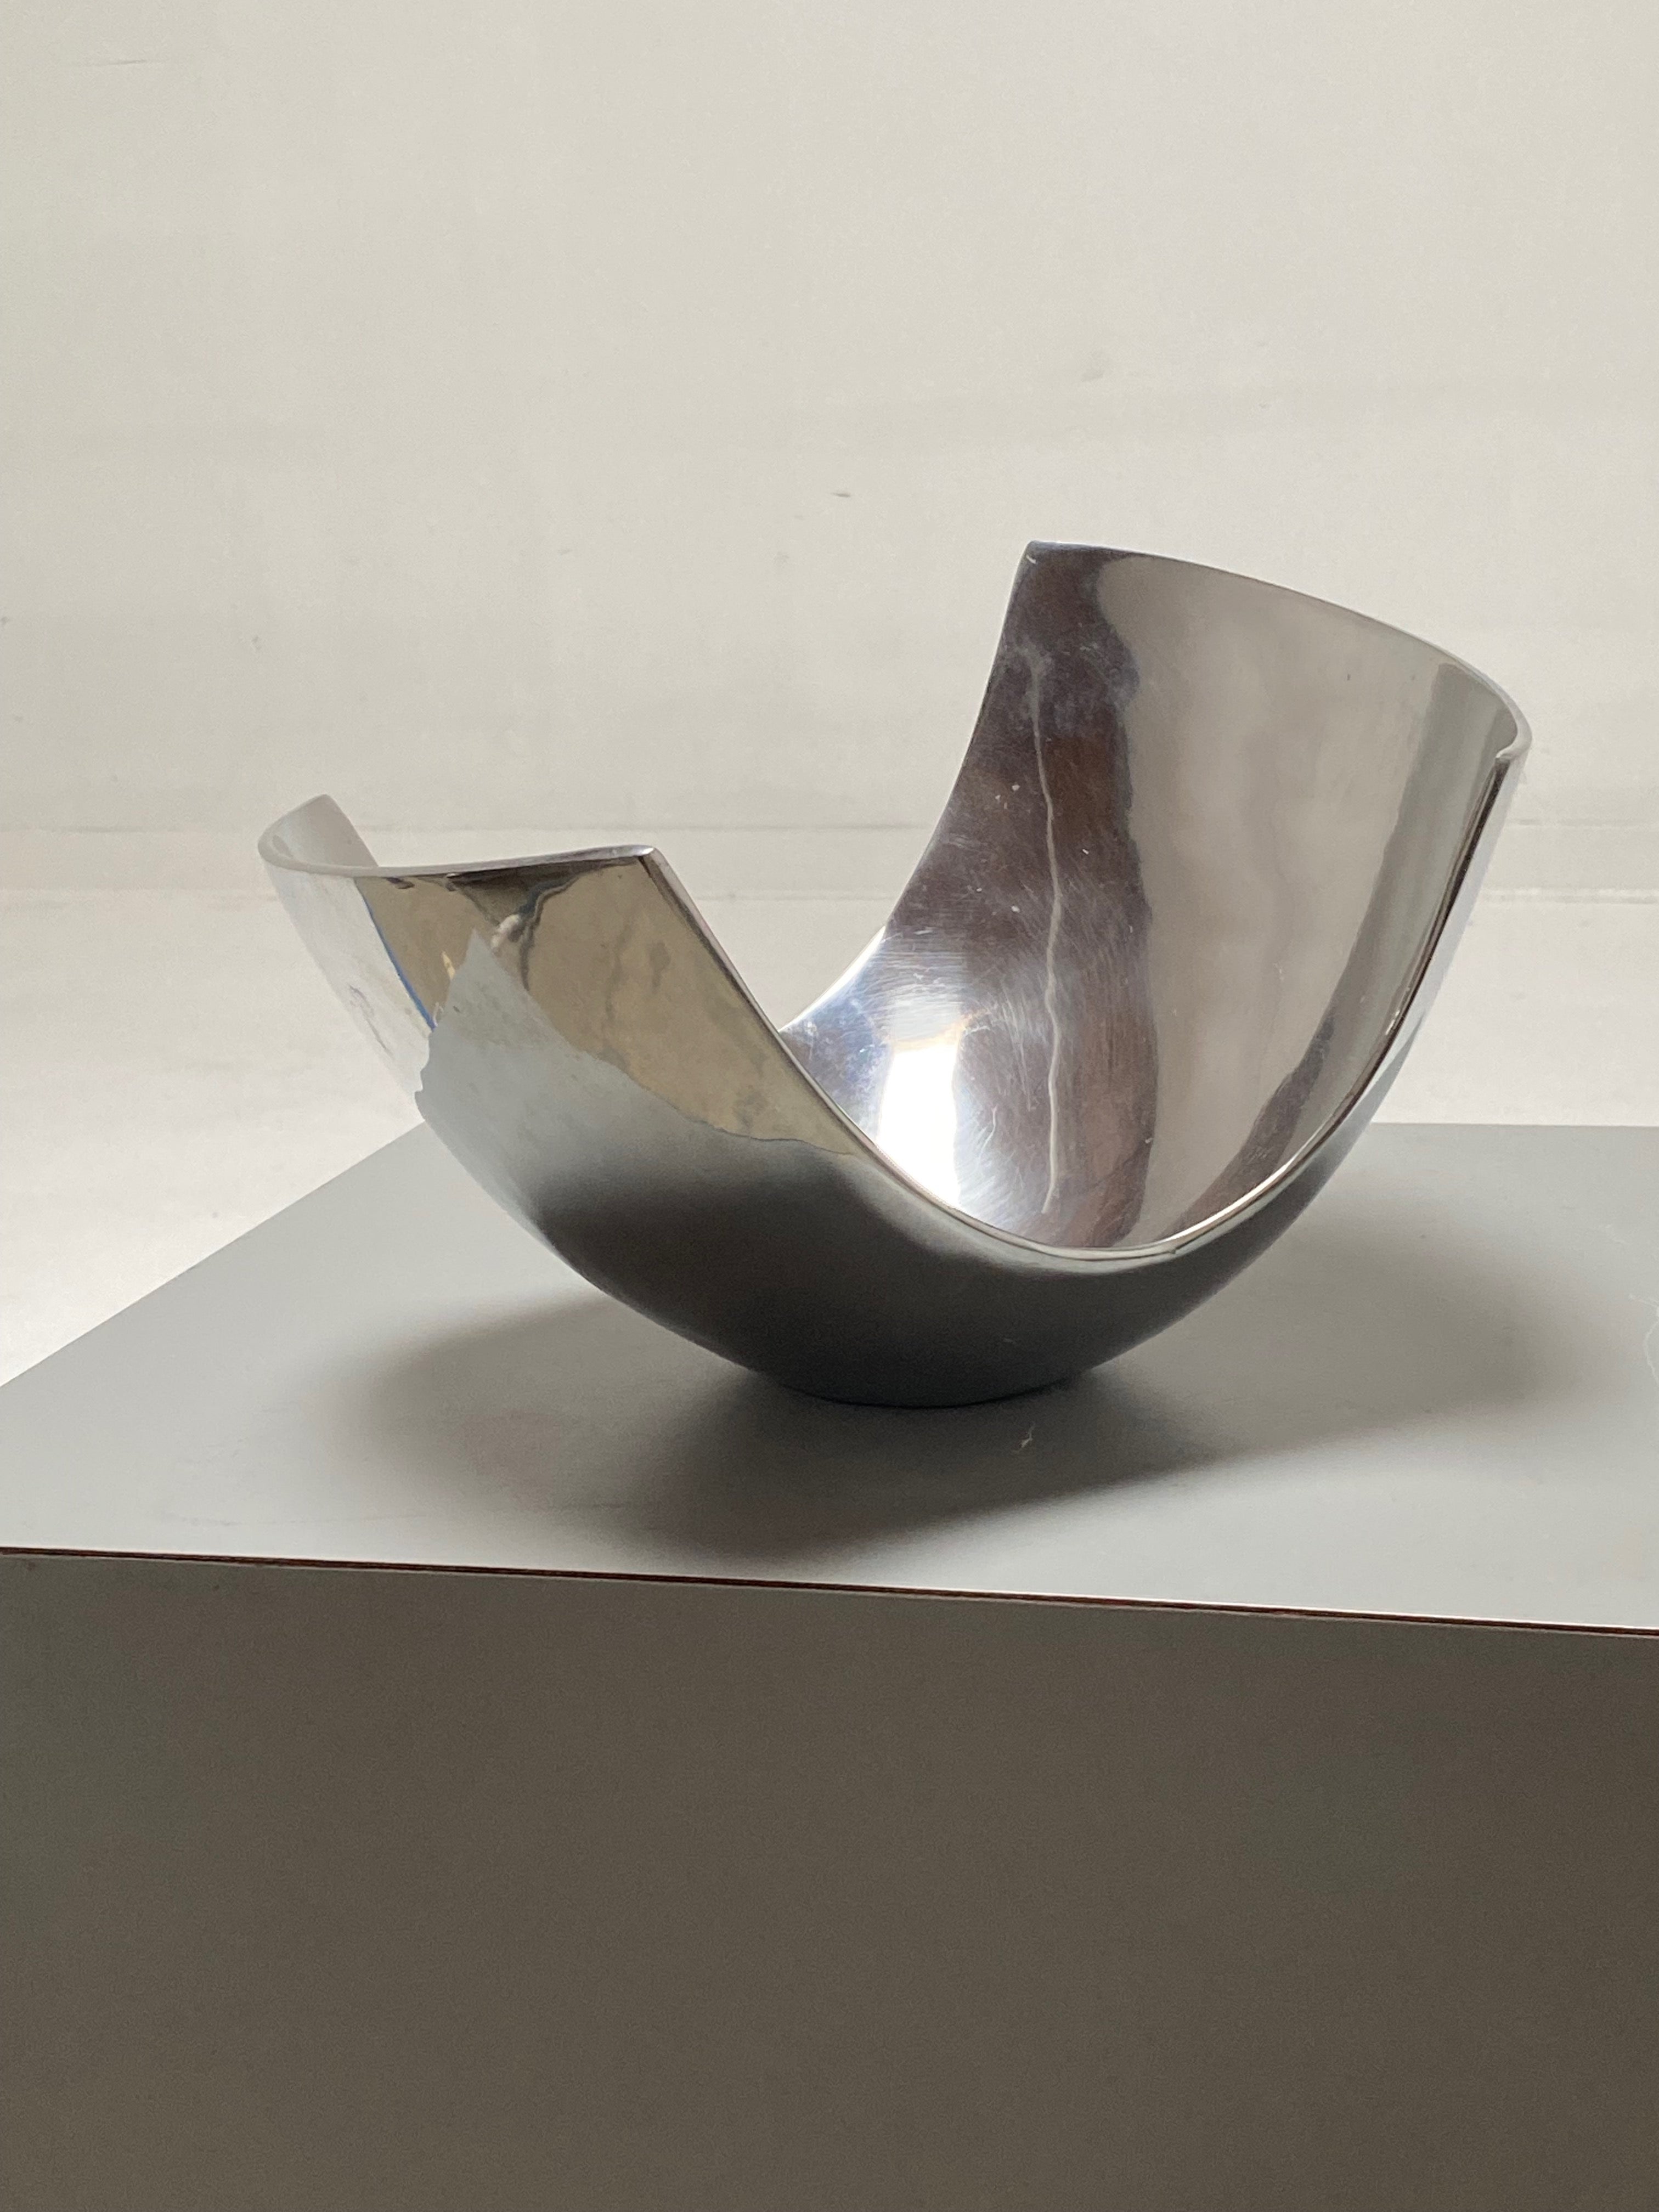 Stainless Steel Centerpiece Bowl